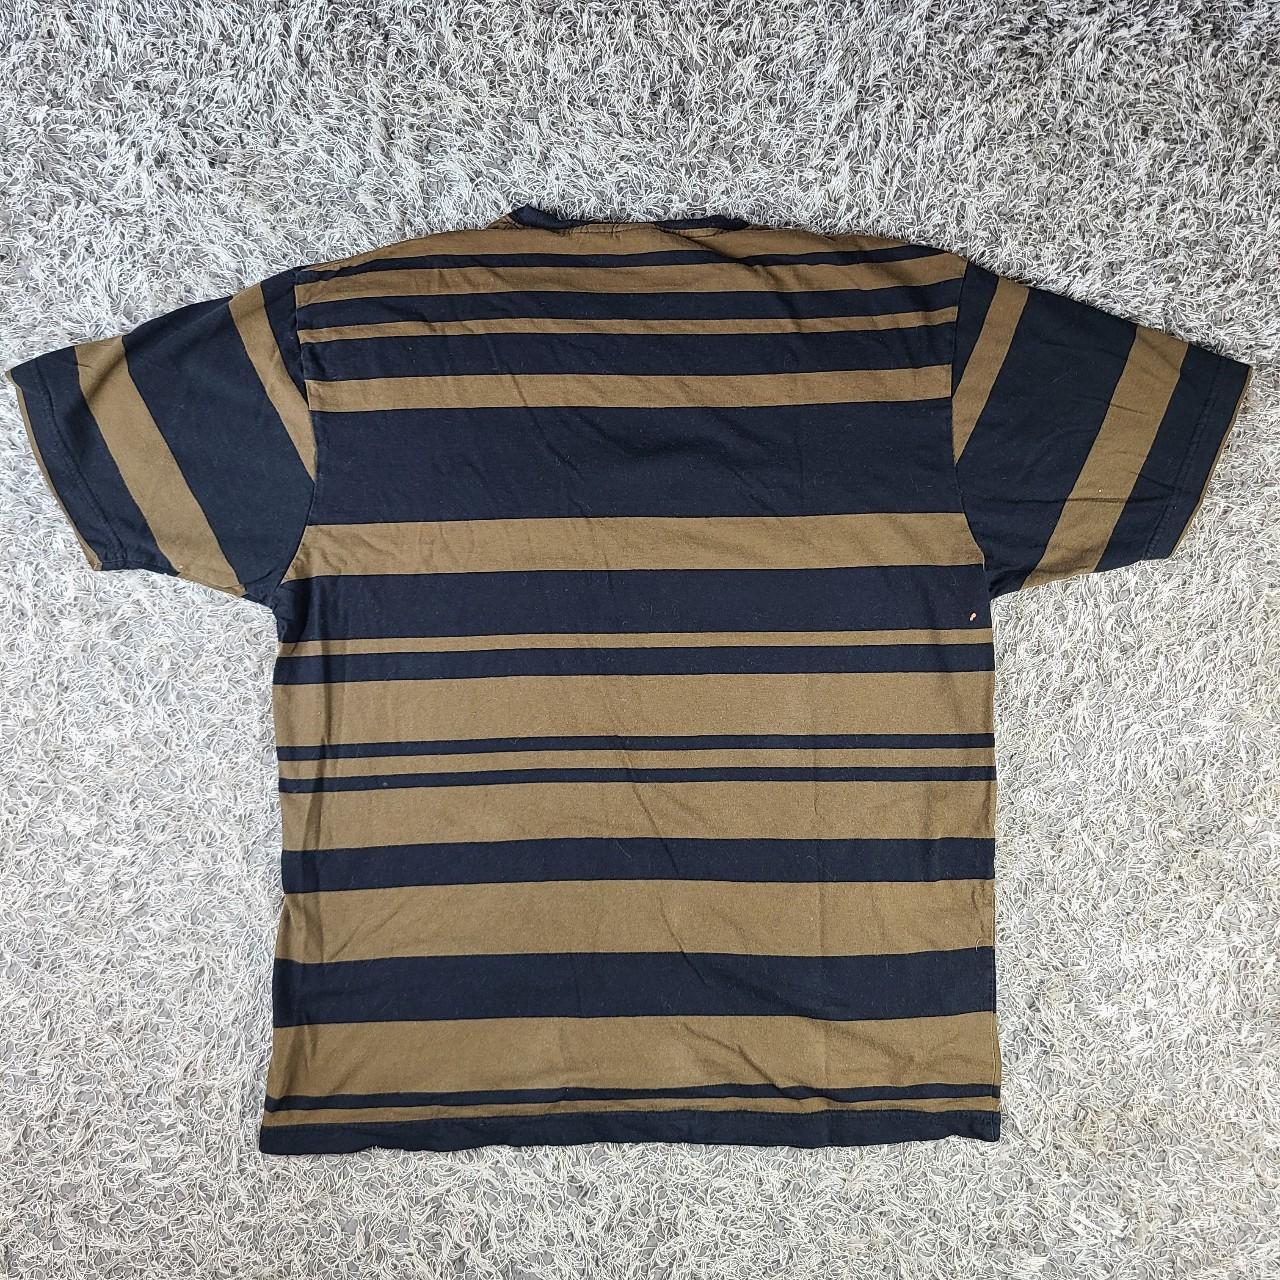 Lifted Research Group LRG brown and black striped... - Depop